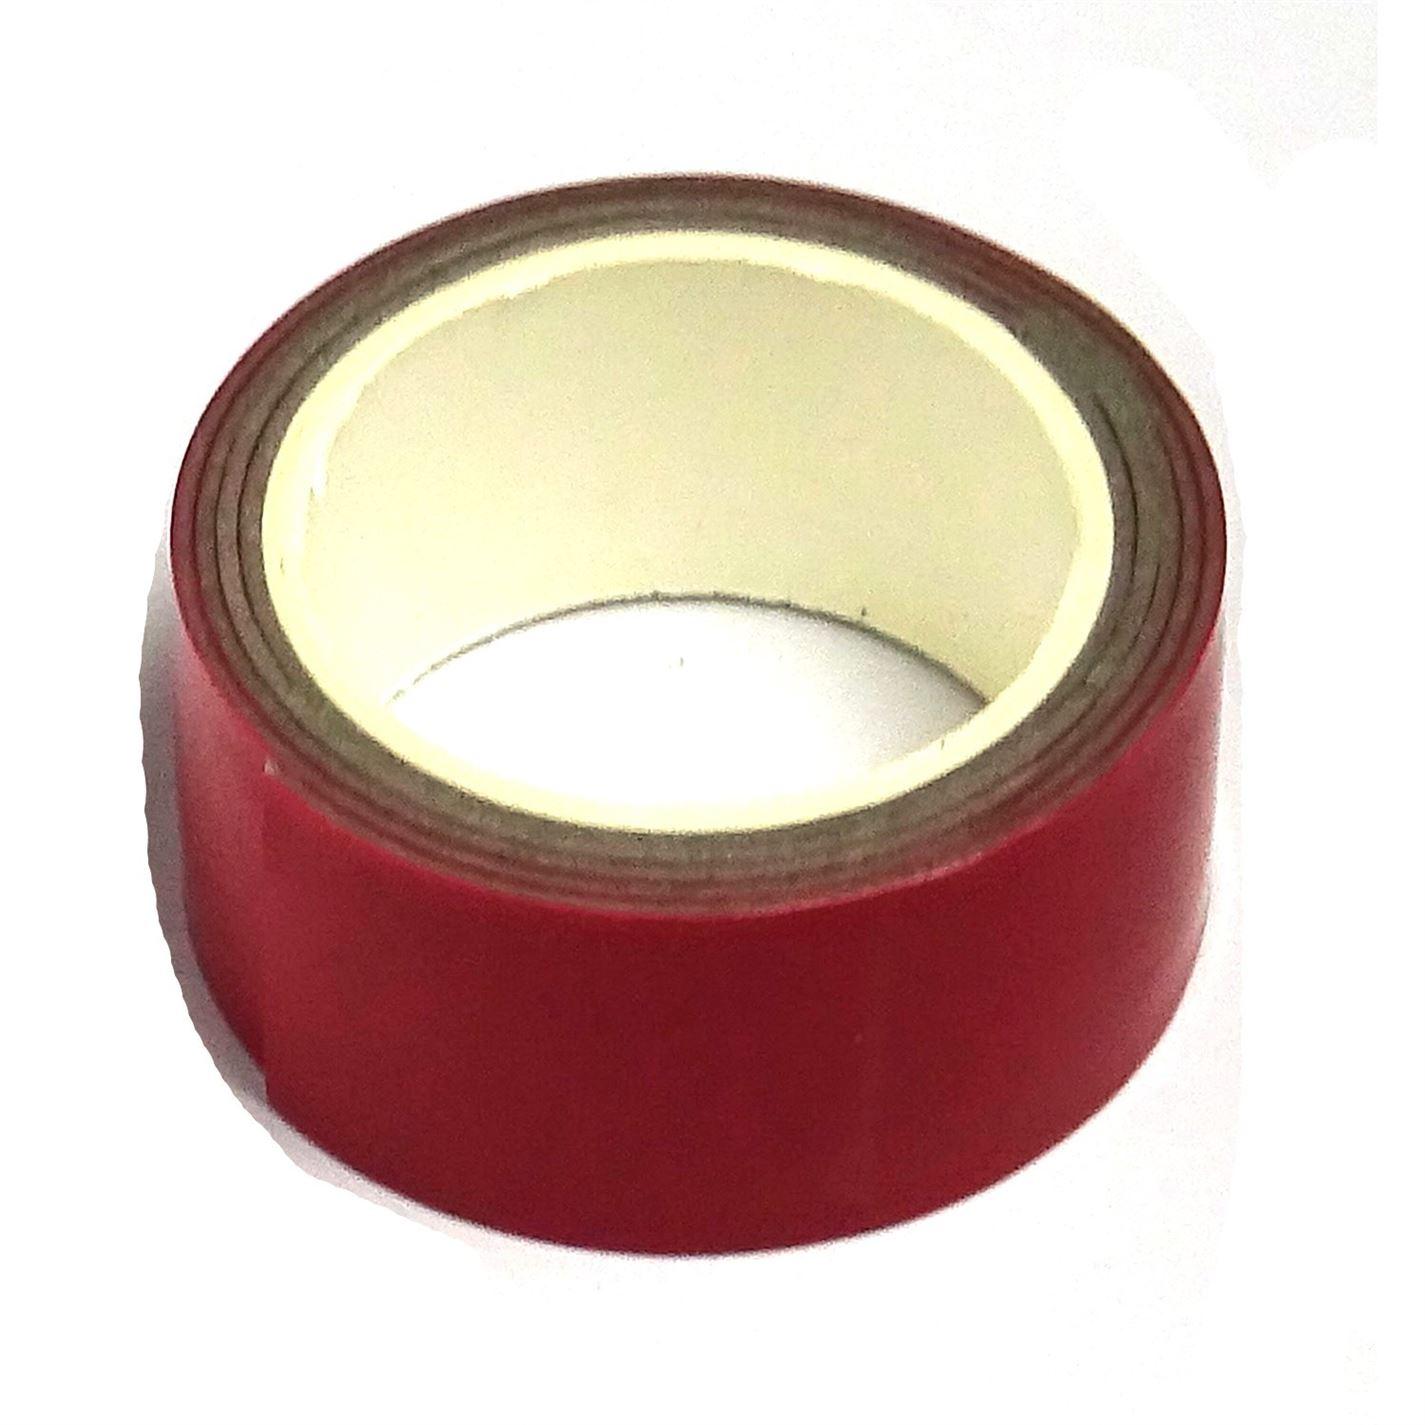 Double Sided Tape for Outdoor Use - 20mm x 340mm - UK Seller